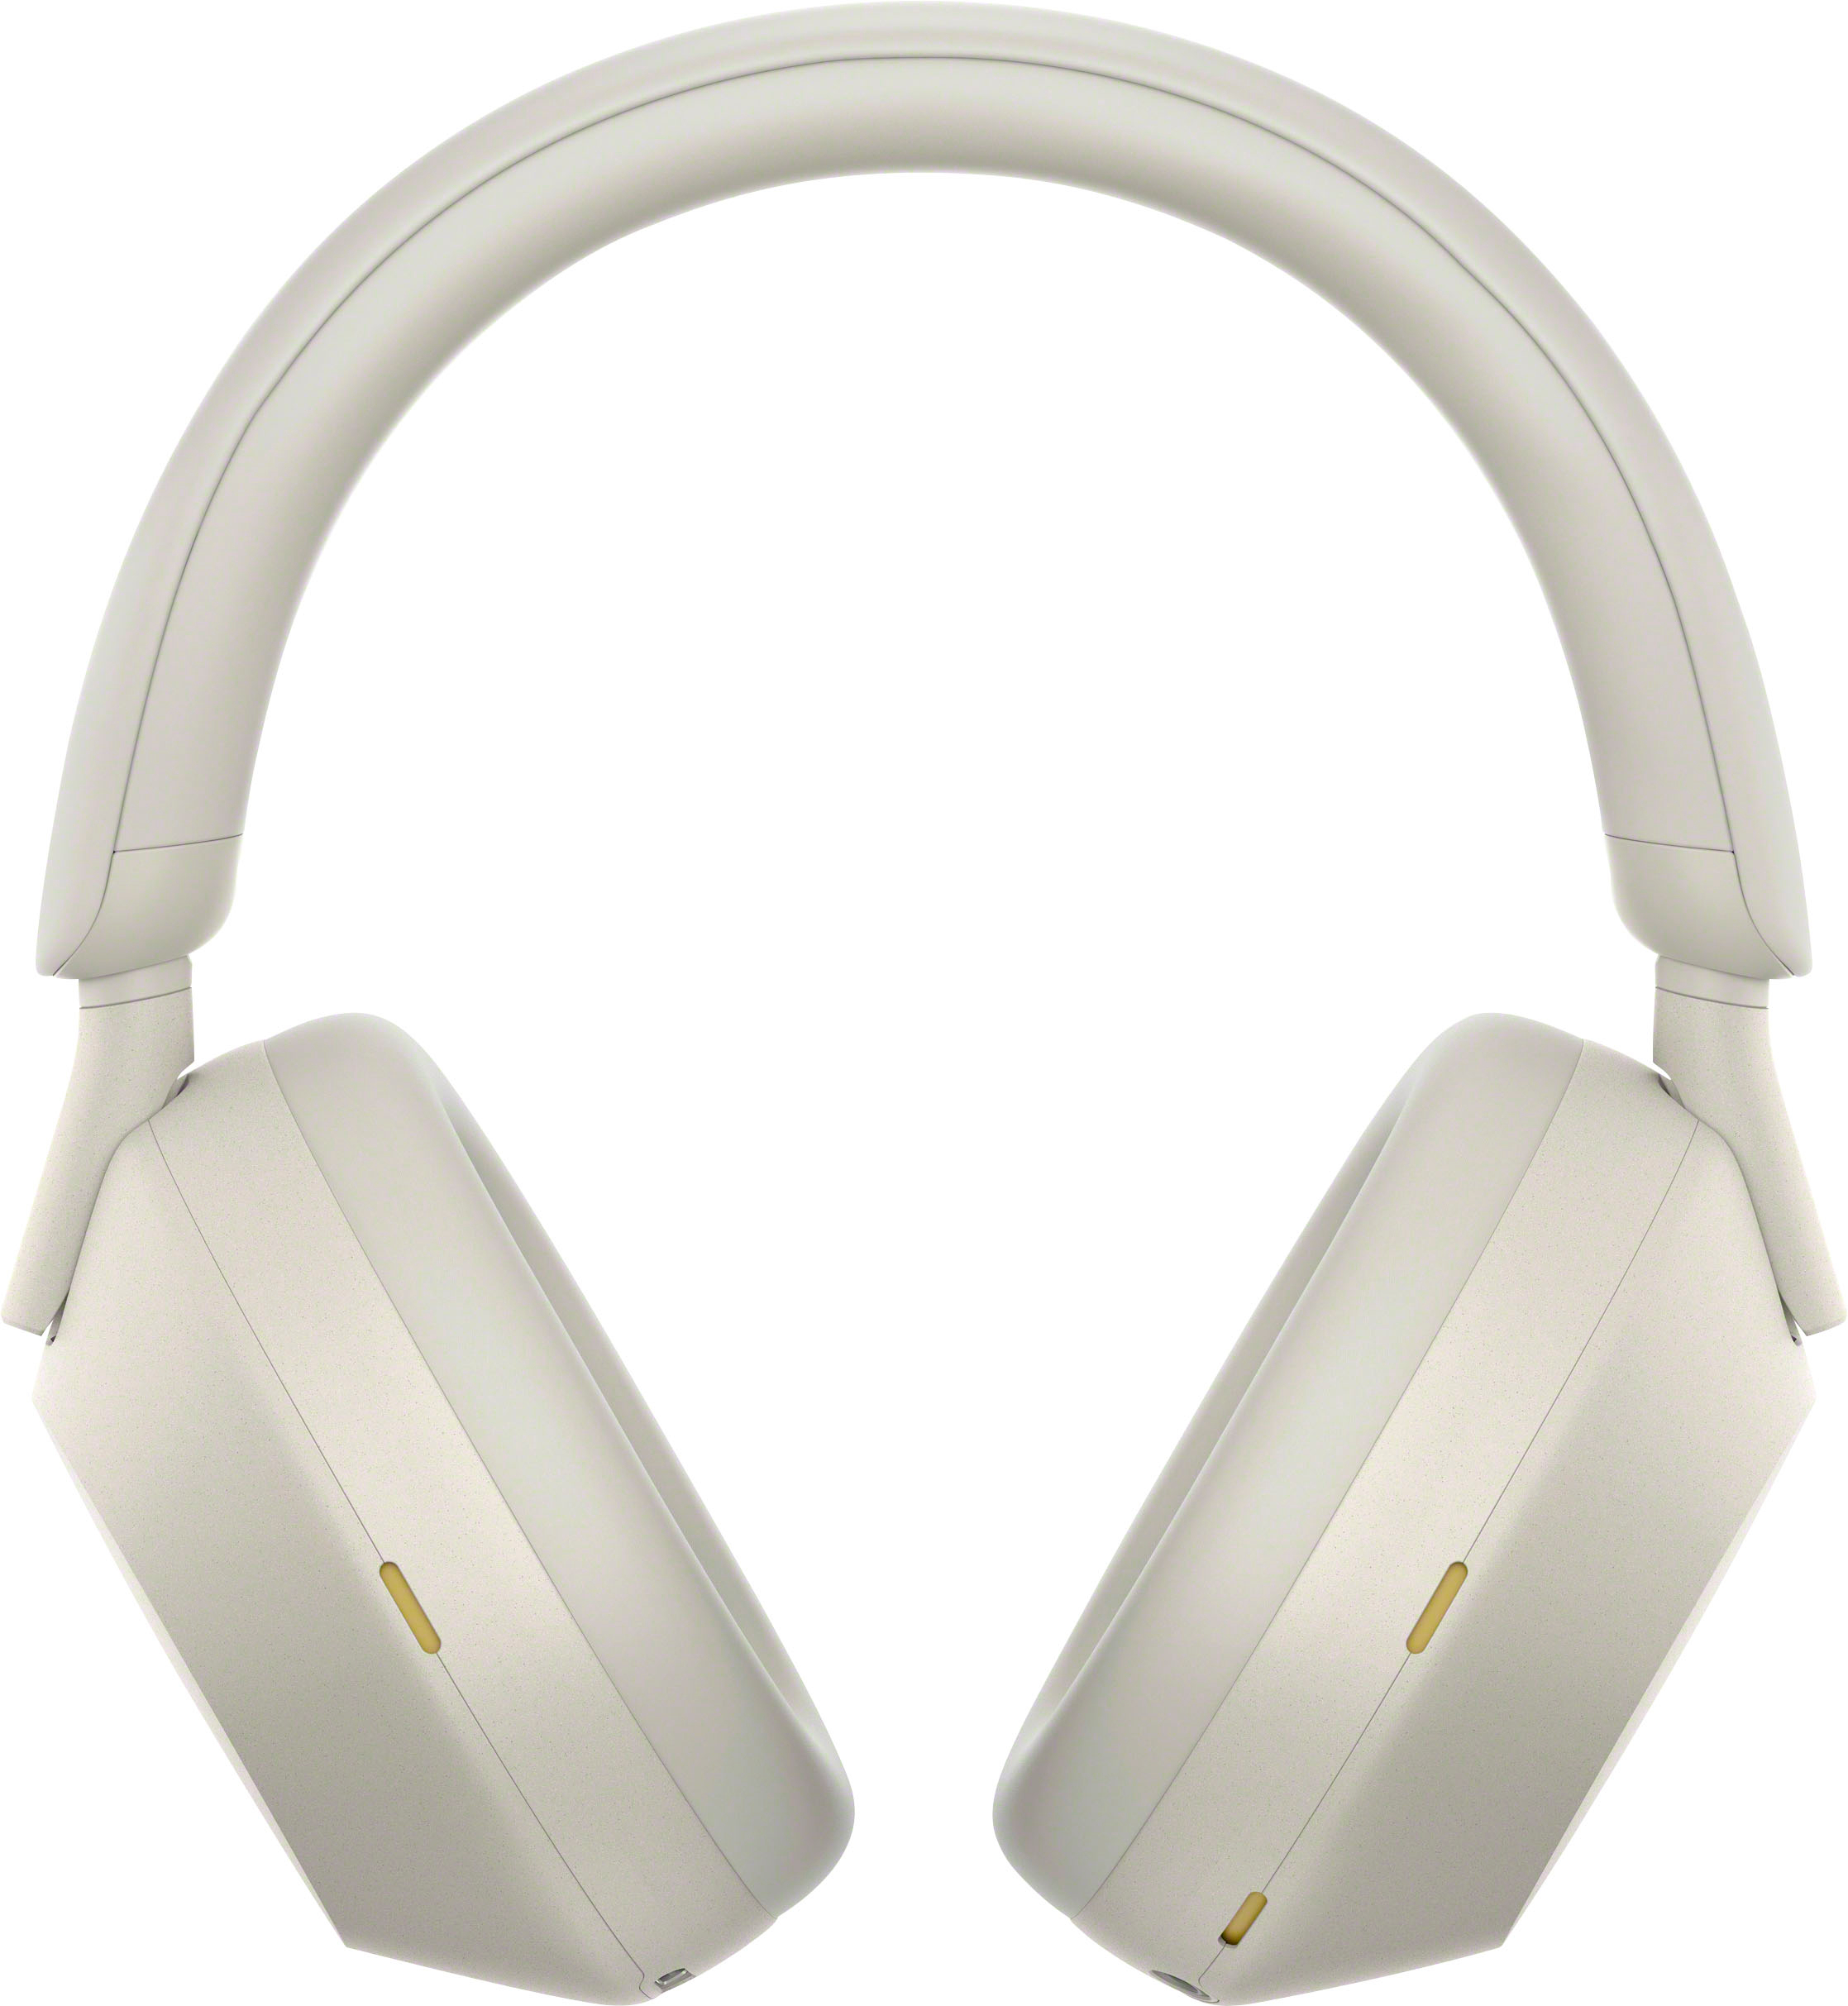 Sony WH-1000XM5 Wireless Noise-Canceling Over-the-Ear Headphones Silver  WH-1000XM5/S - Best Buy